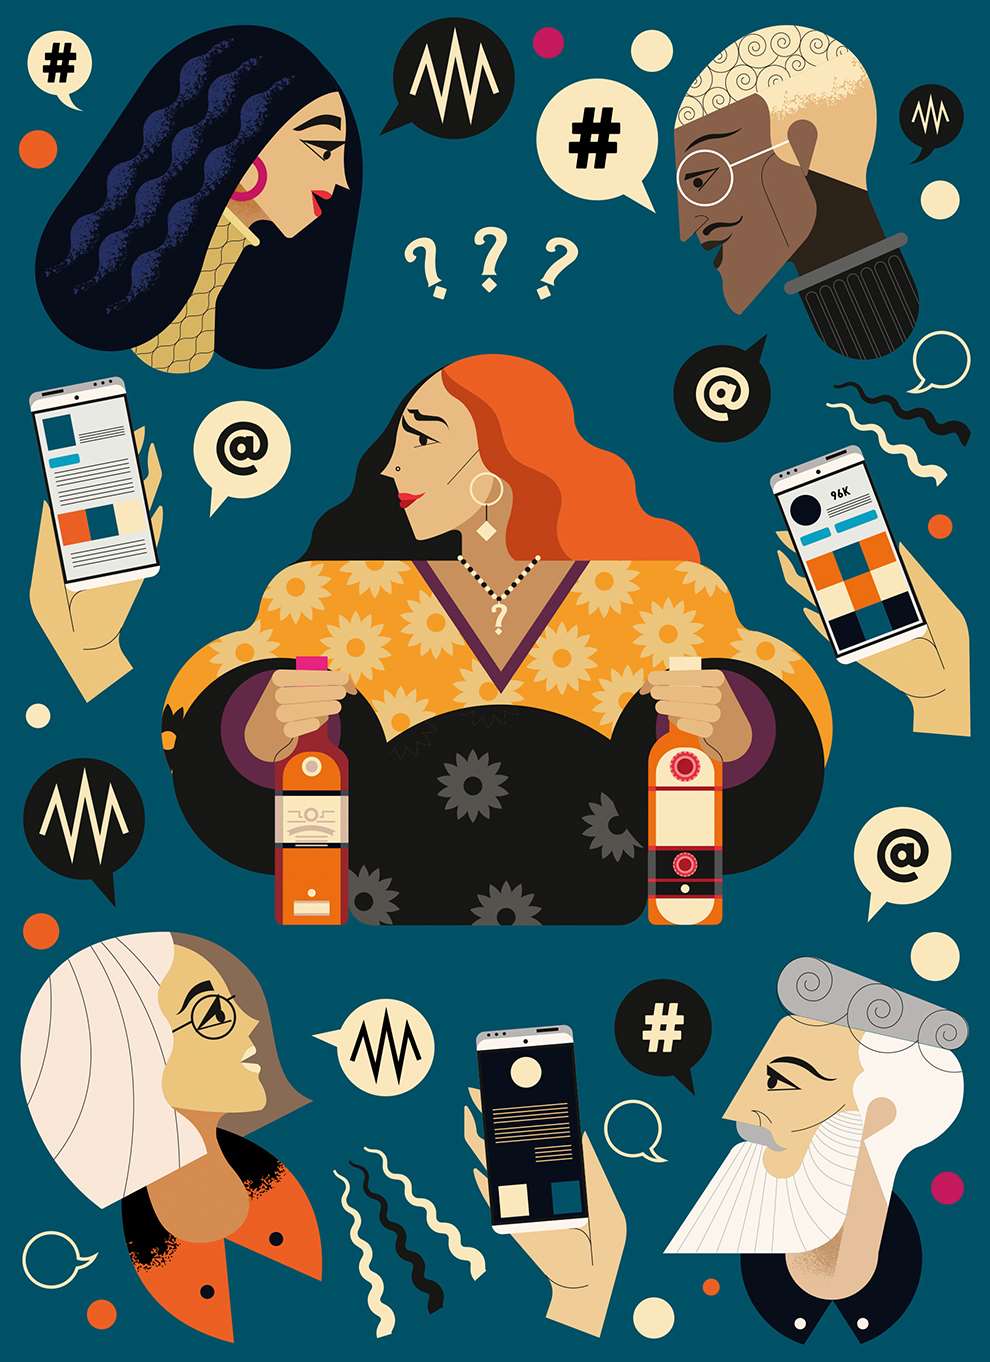 Jonny Wan, Digital geometric illustration exploring the world of what's real and fake on social media featuring a series of women and speech marks.